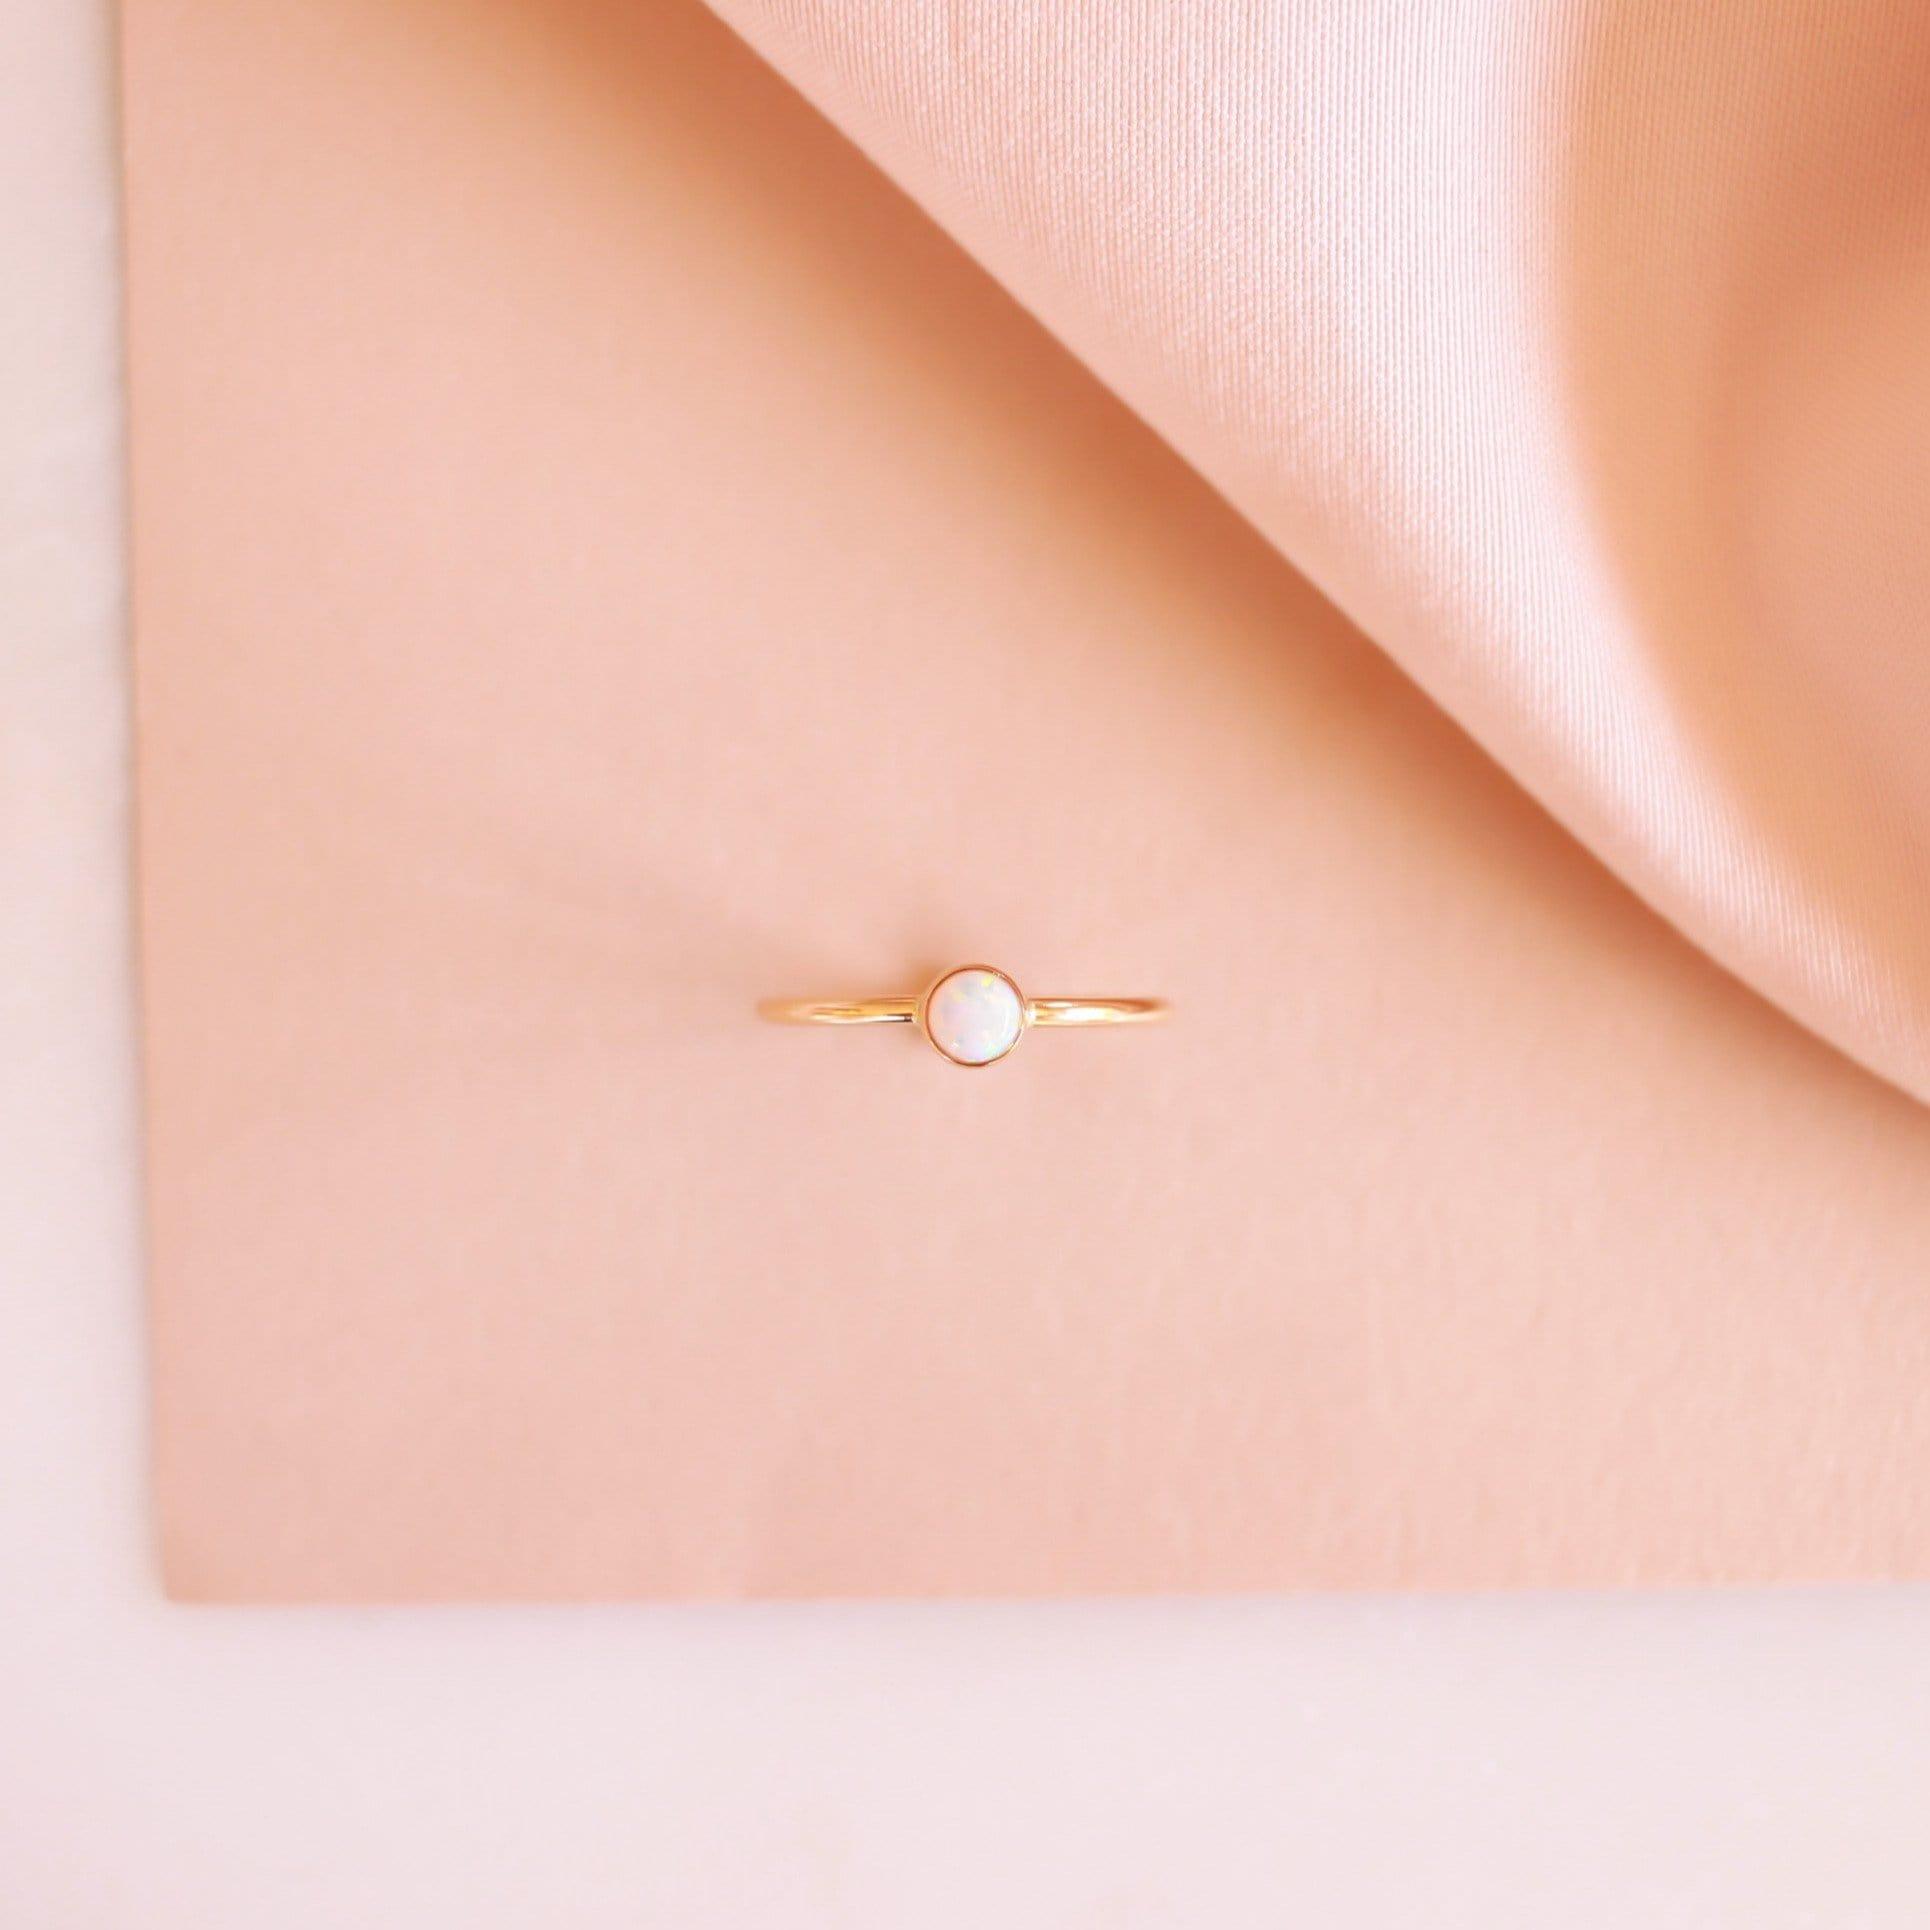 October Birthstone Ring ∙ Opal - Nolia Jewelry - Meaningful + Sustainably Handcrafted Jewelry